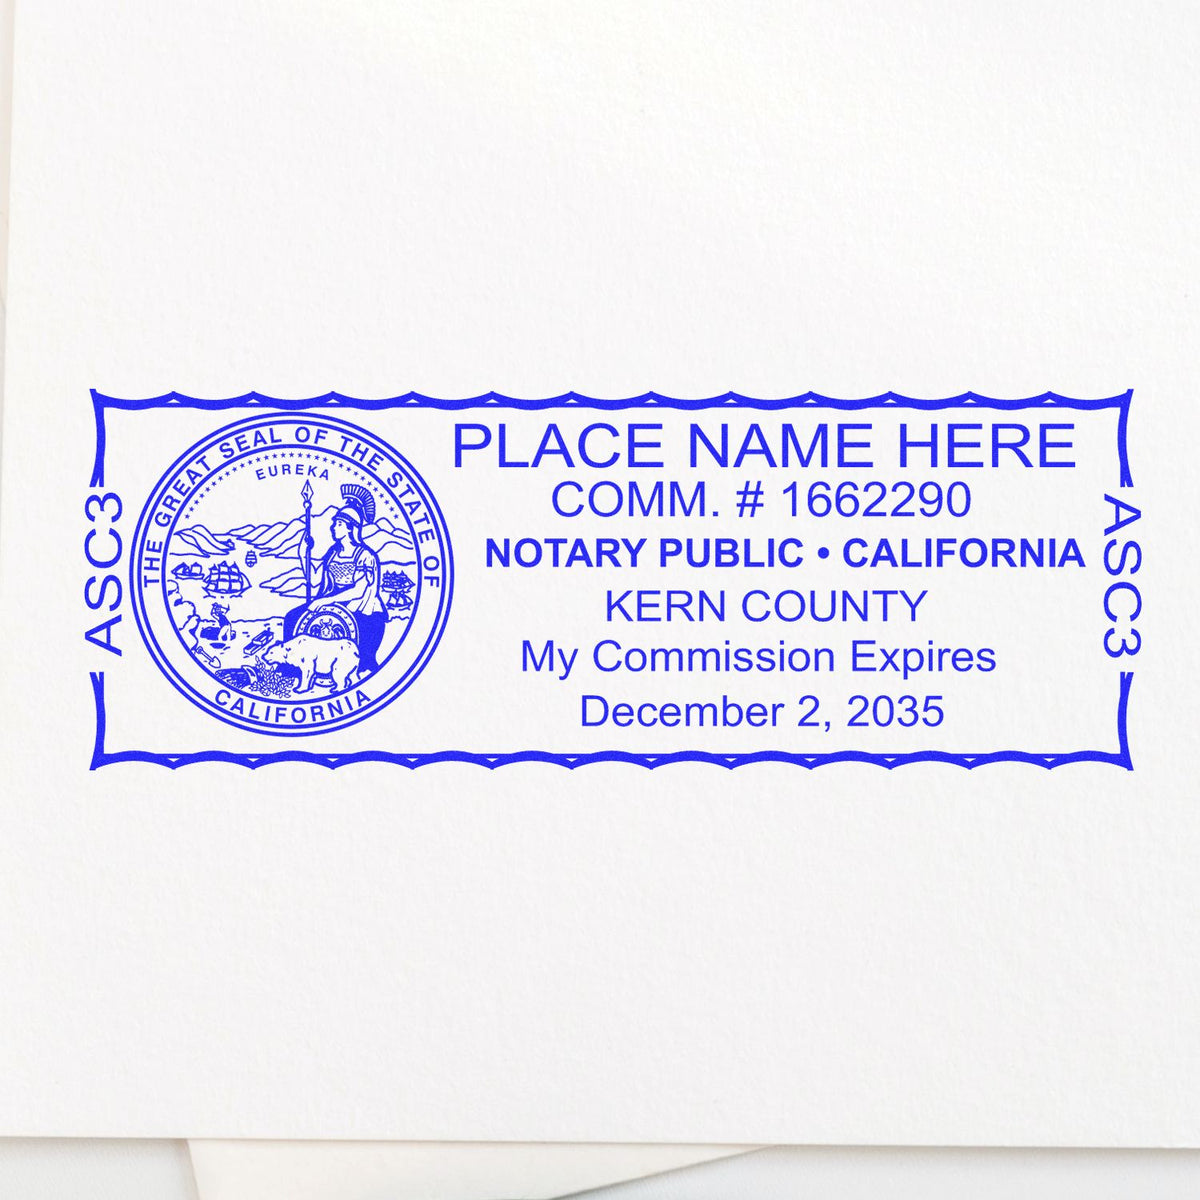 The PSI California Notary Stamp stamp impression comes to life with a crisp, detailed photo on paper - showcasing true professional quality.